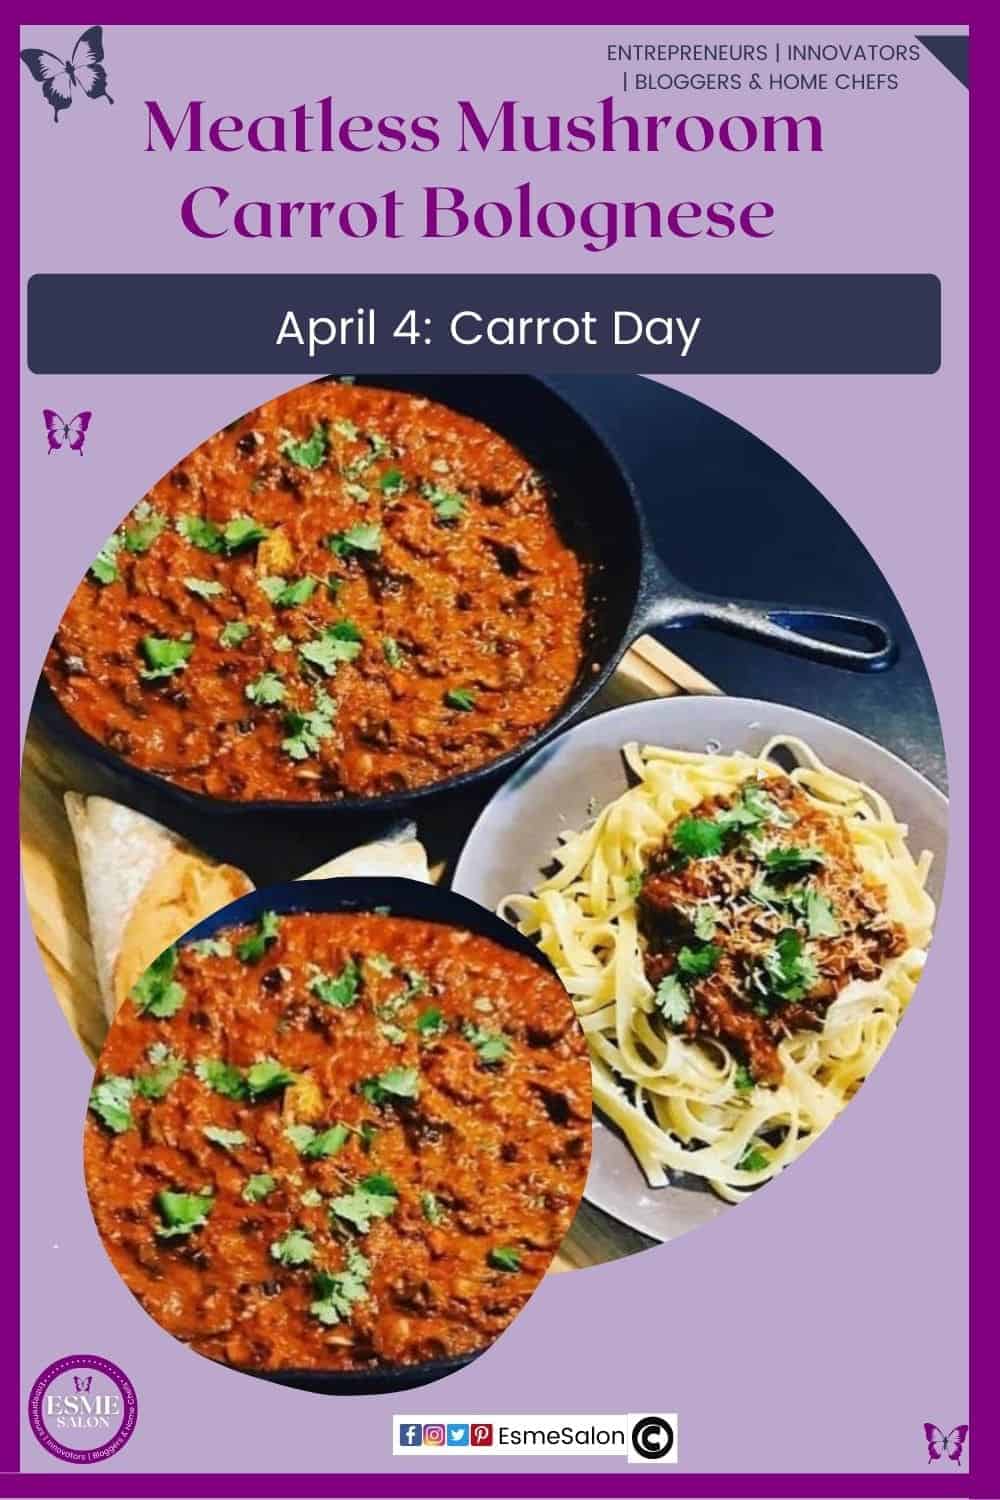 an image of a black metal pan with a Meatless Mushroom Carrots Bolognese dish and a plate with pasta and the Bolognese on top